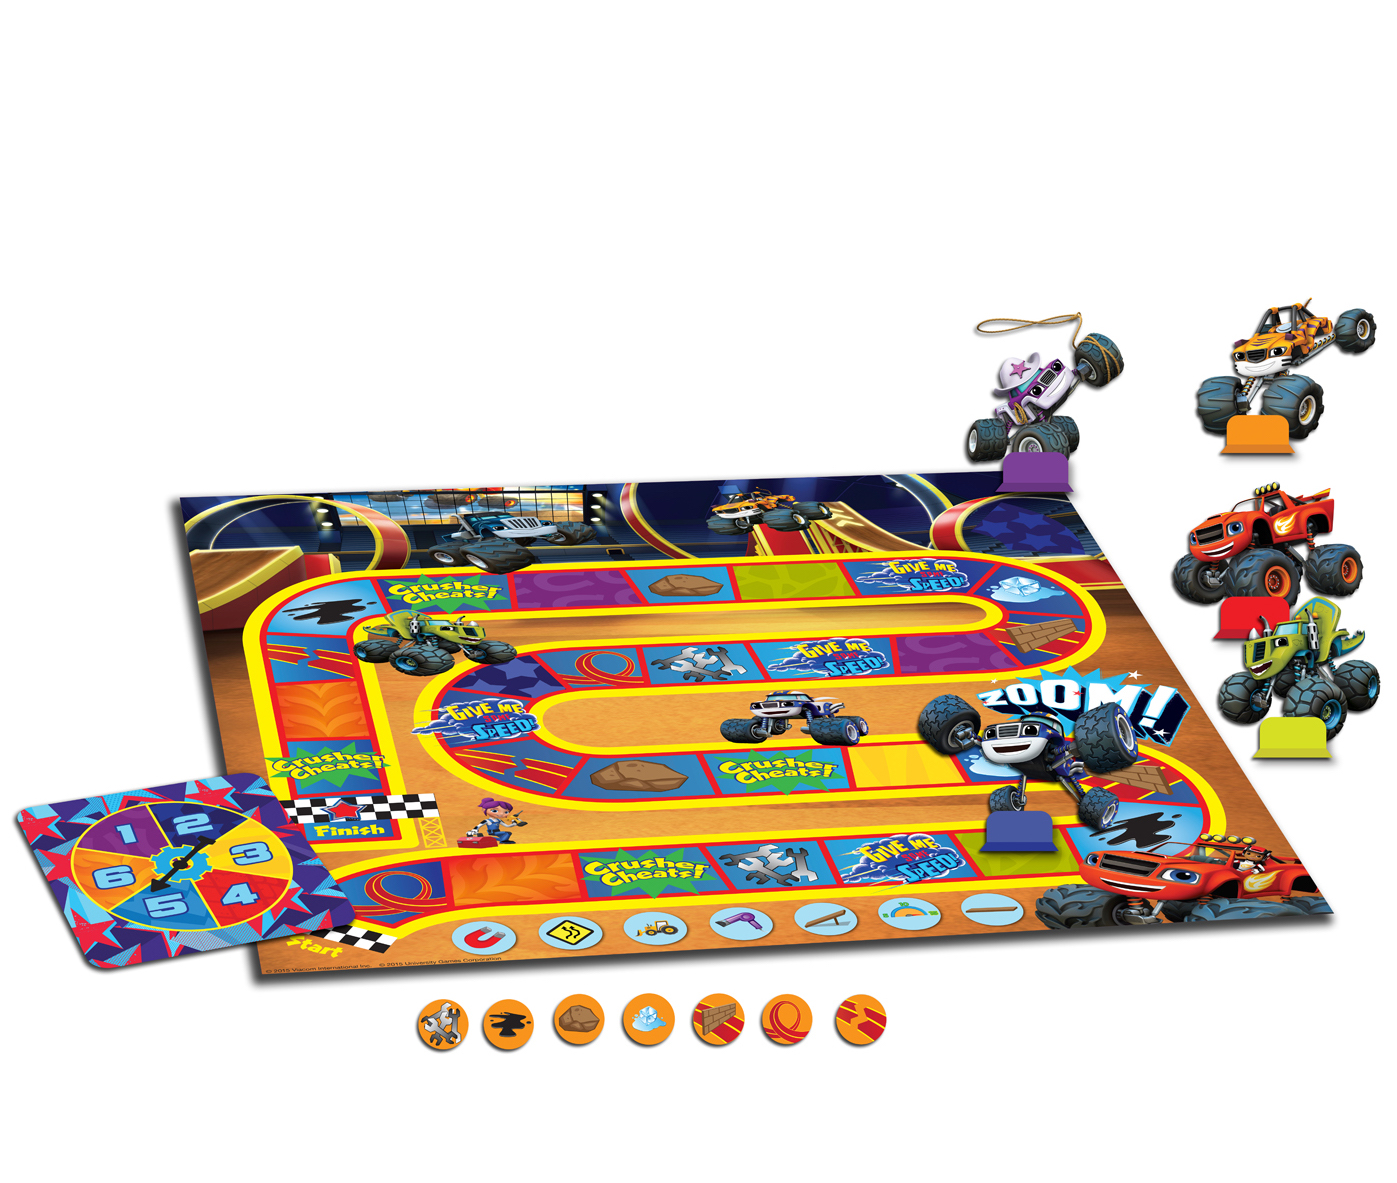 Blaze and the Monster Machines: Monster Dome Challenge Game